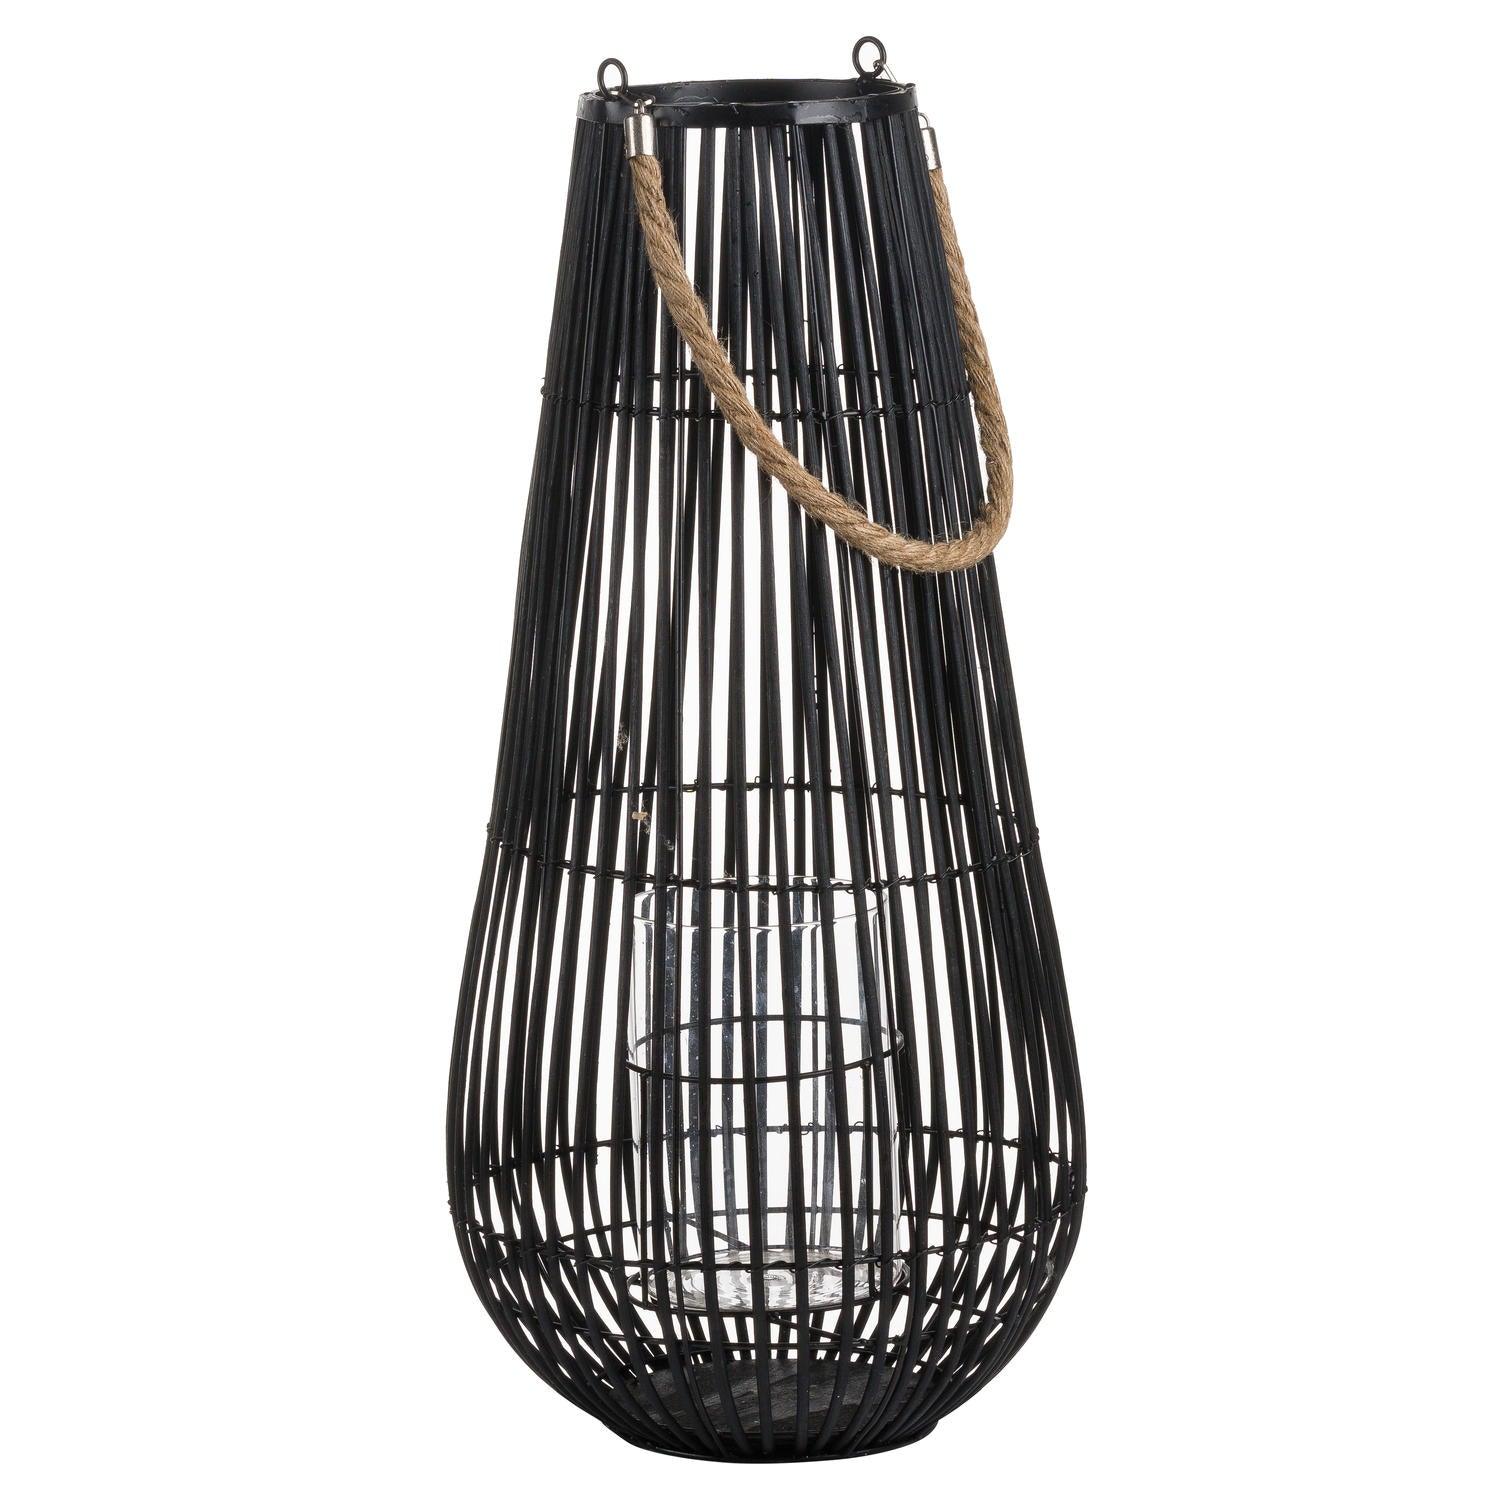 View Small Domed Rattan Lantern With Rope Detail information